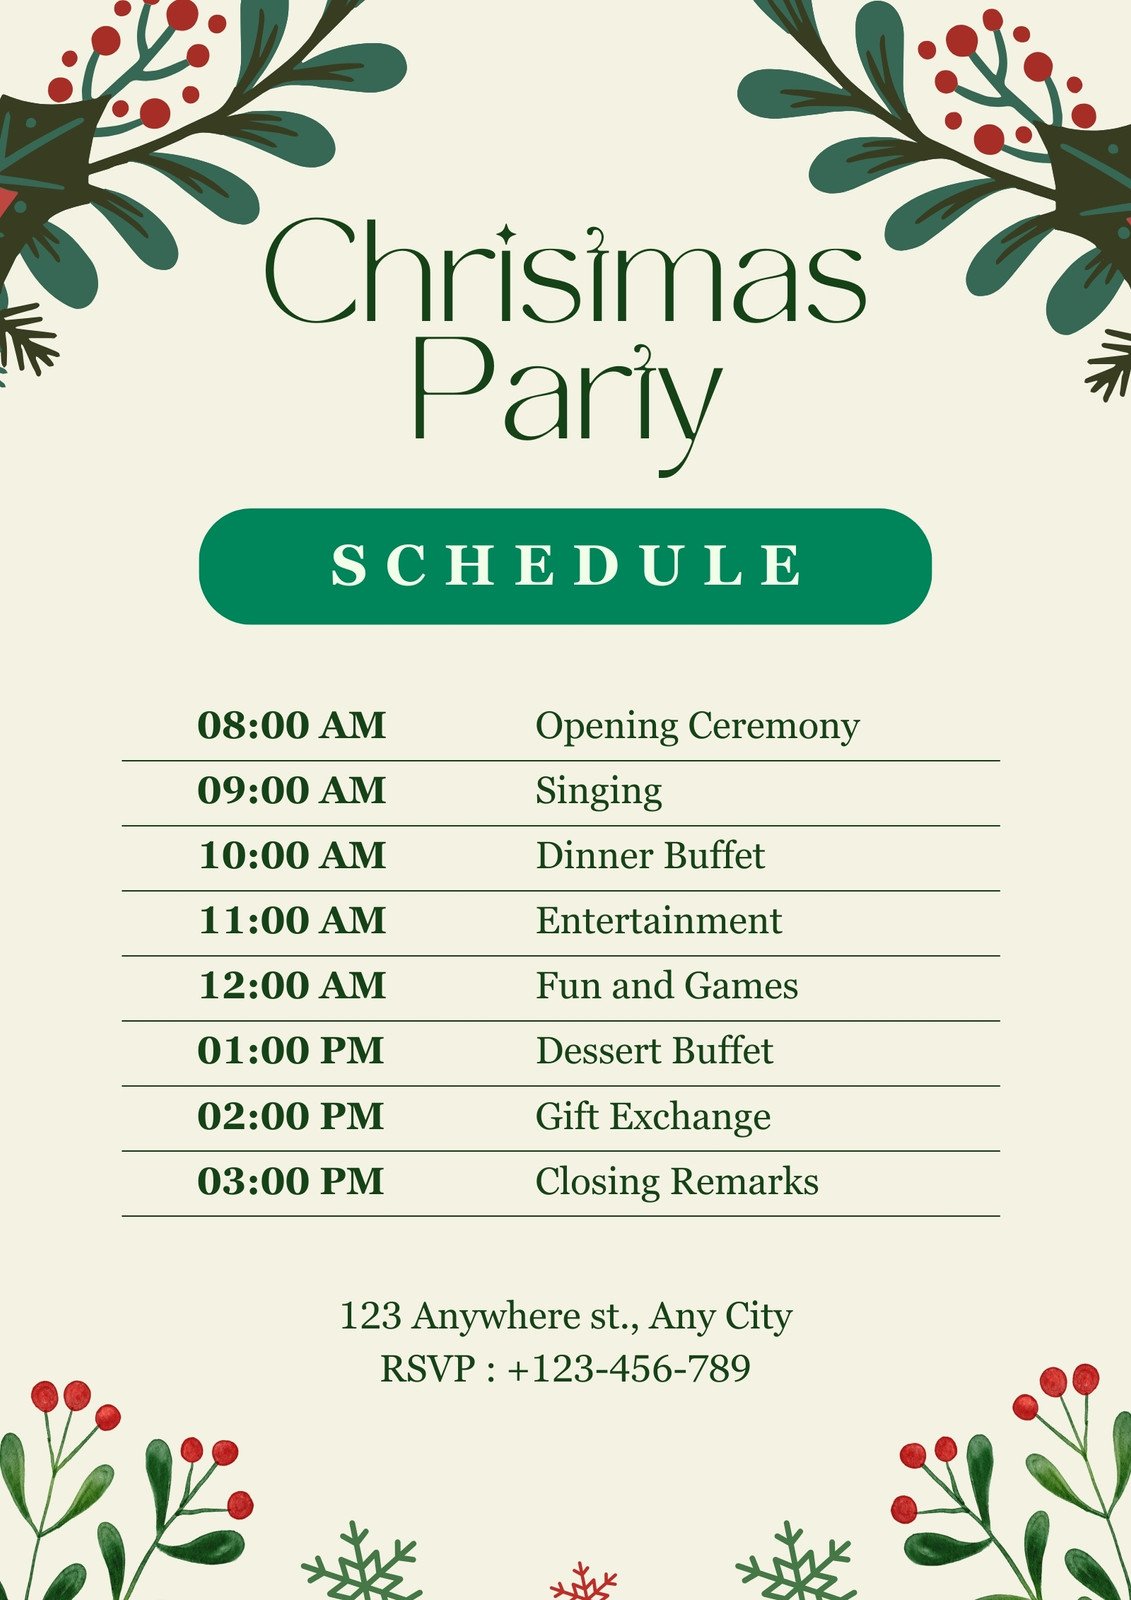 Yellow and Green Illustrative Christmas Schedule Flyer